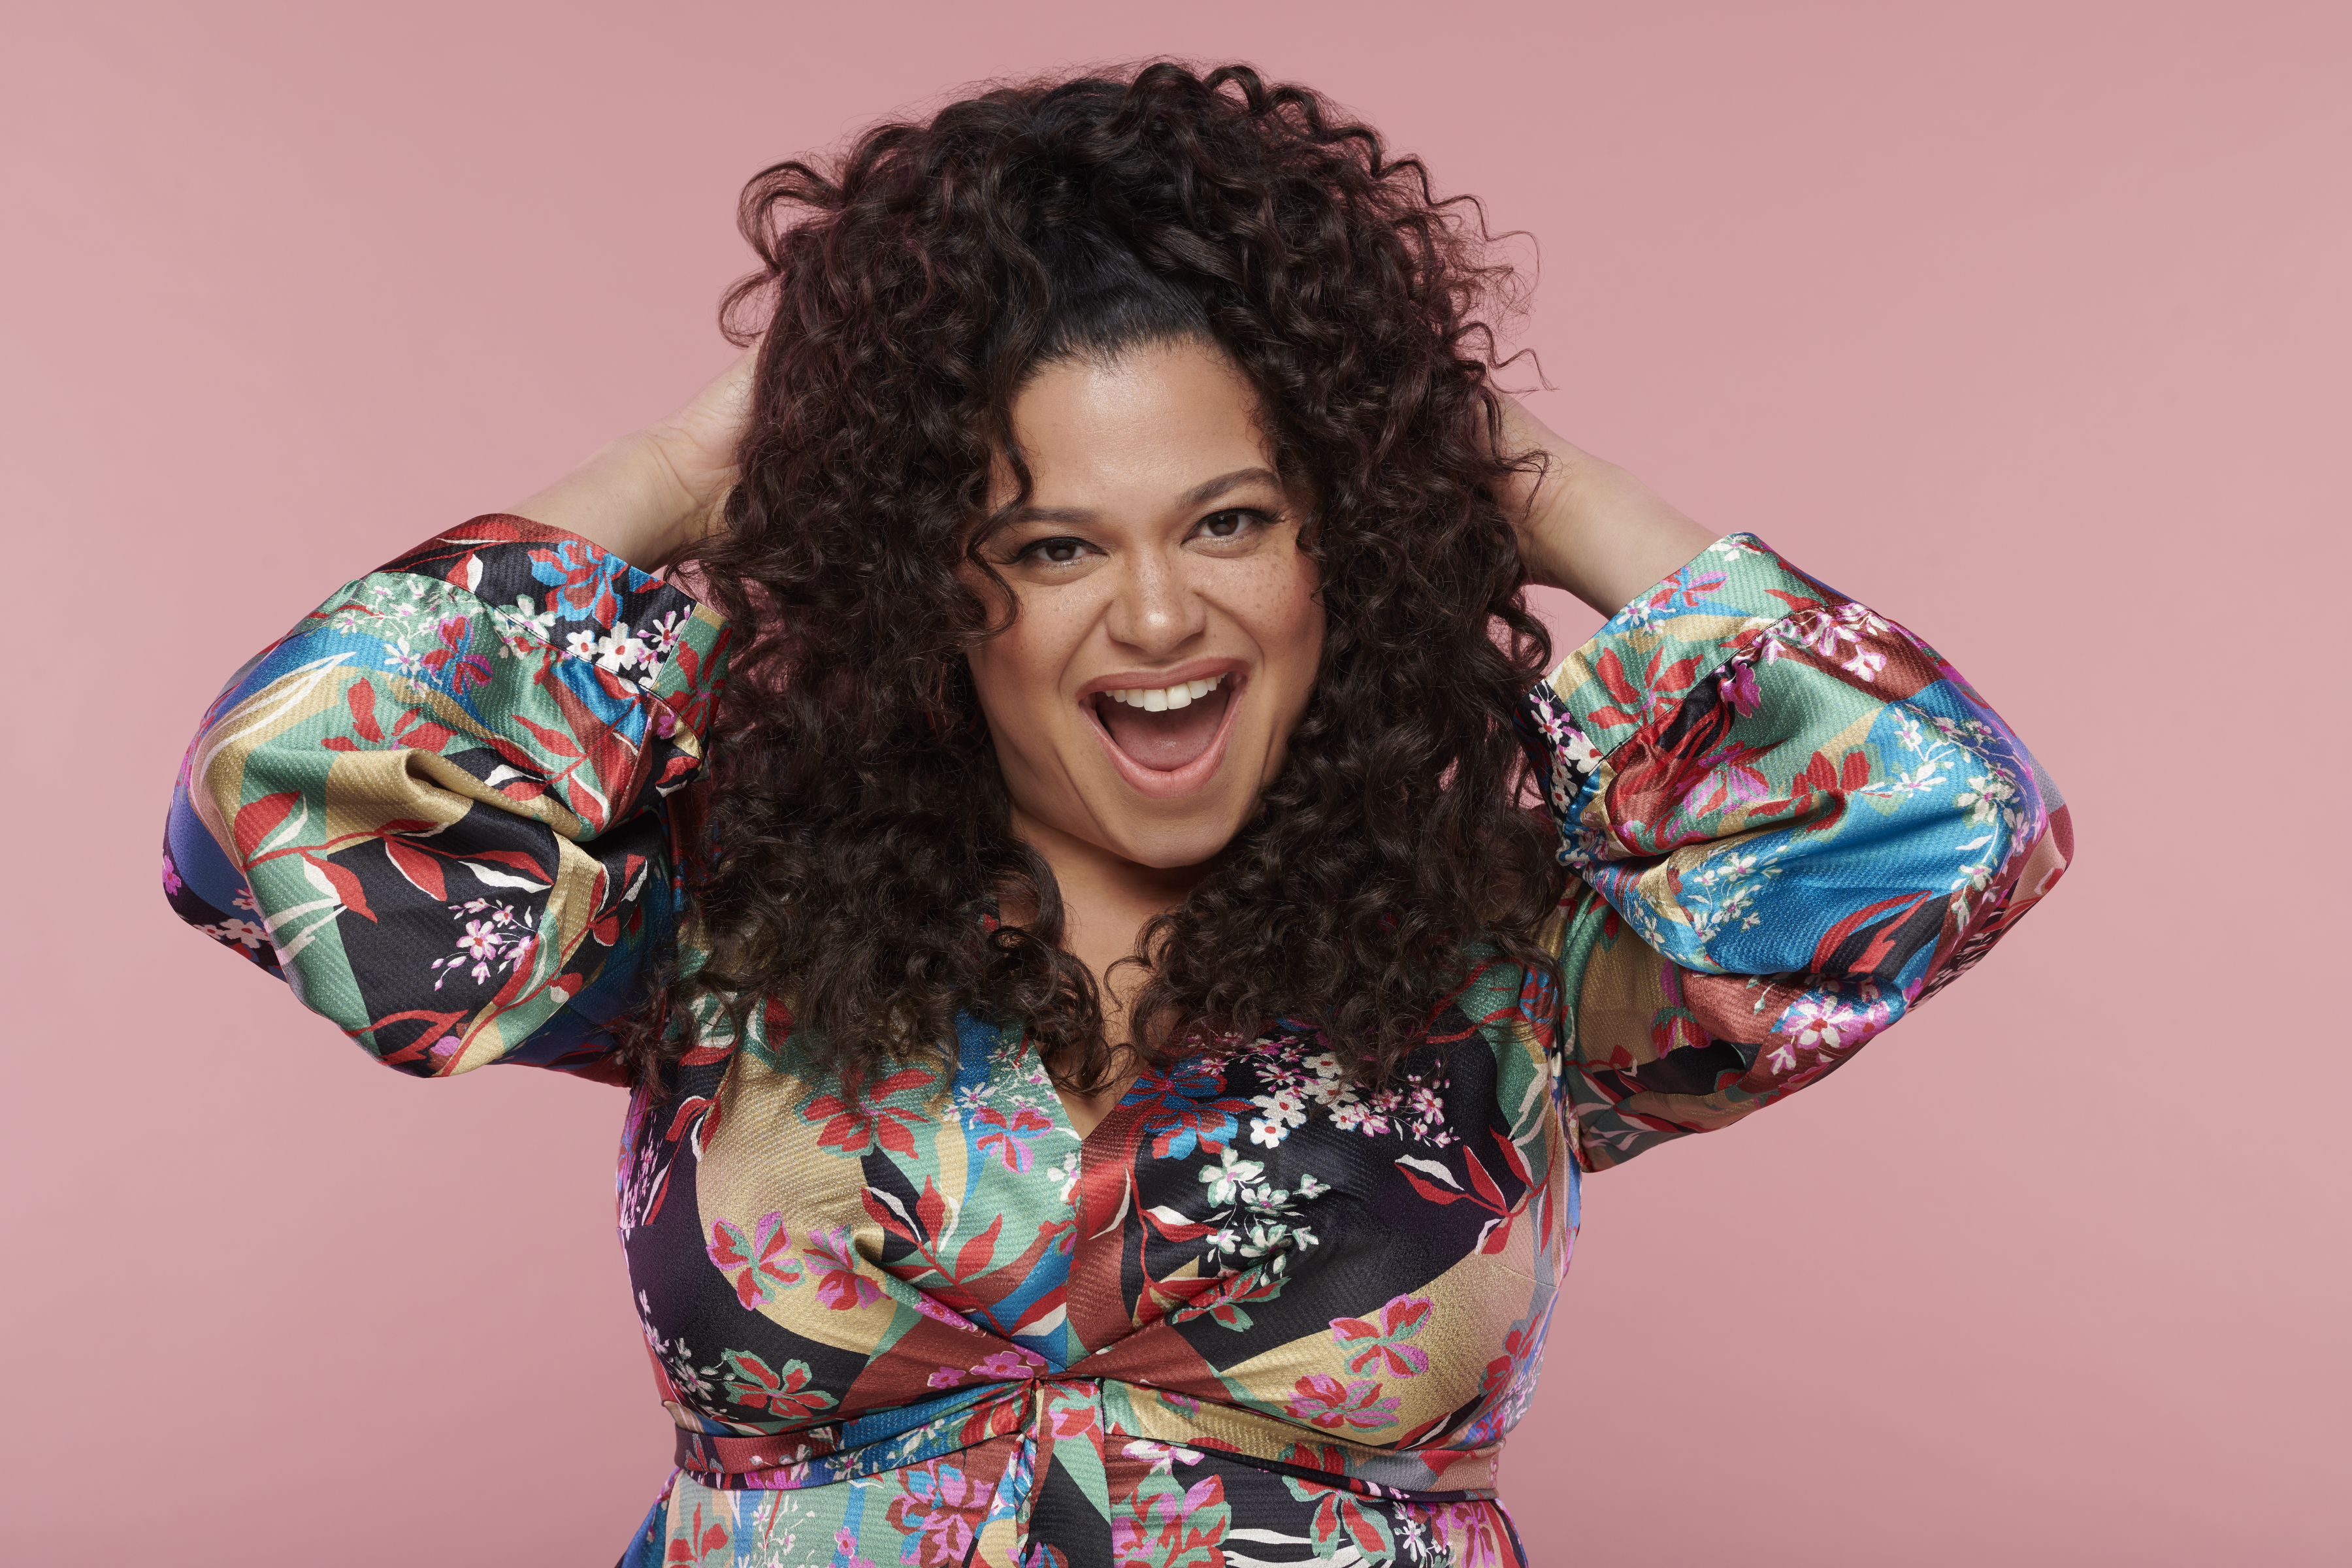 Michelle Buteau's 'Survival of the Thickest': TV Review